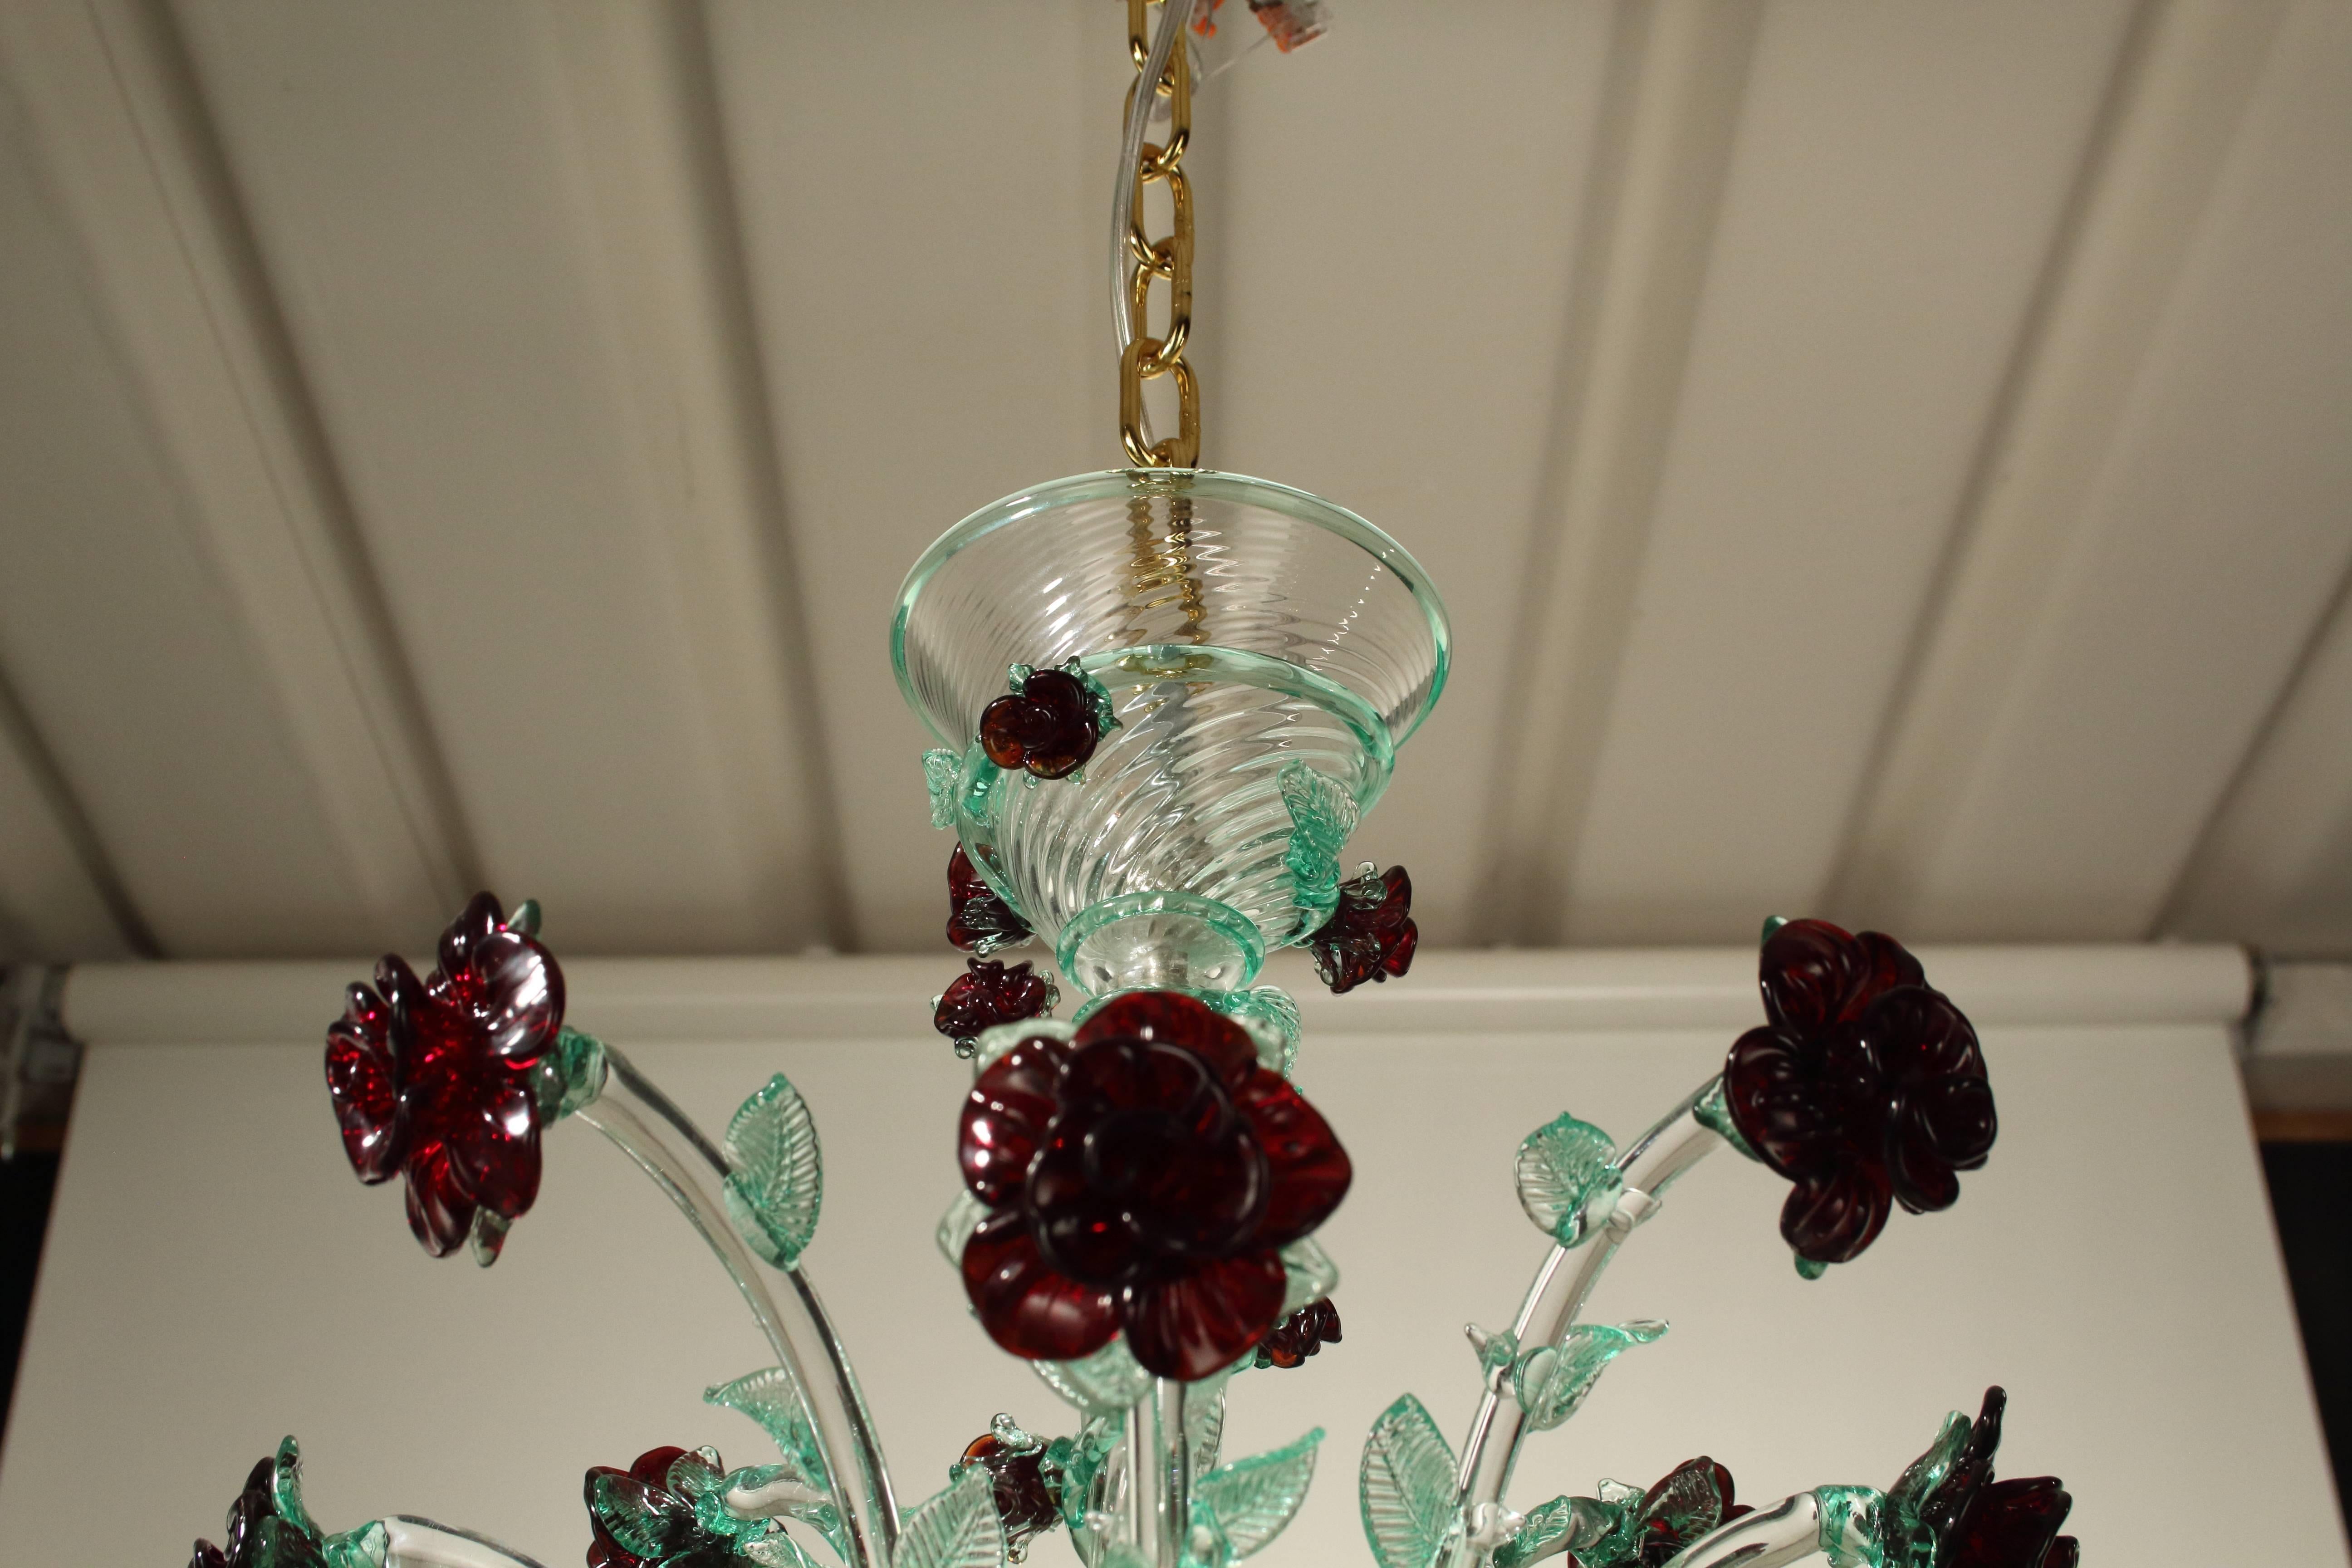 Italian Noveau Style, Murano Blown Glass Chandelier, Floreal trimmings For Sale 3